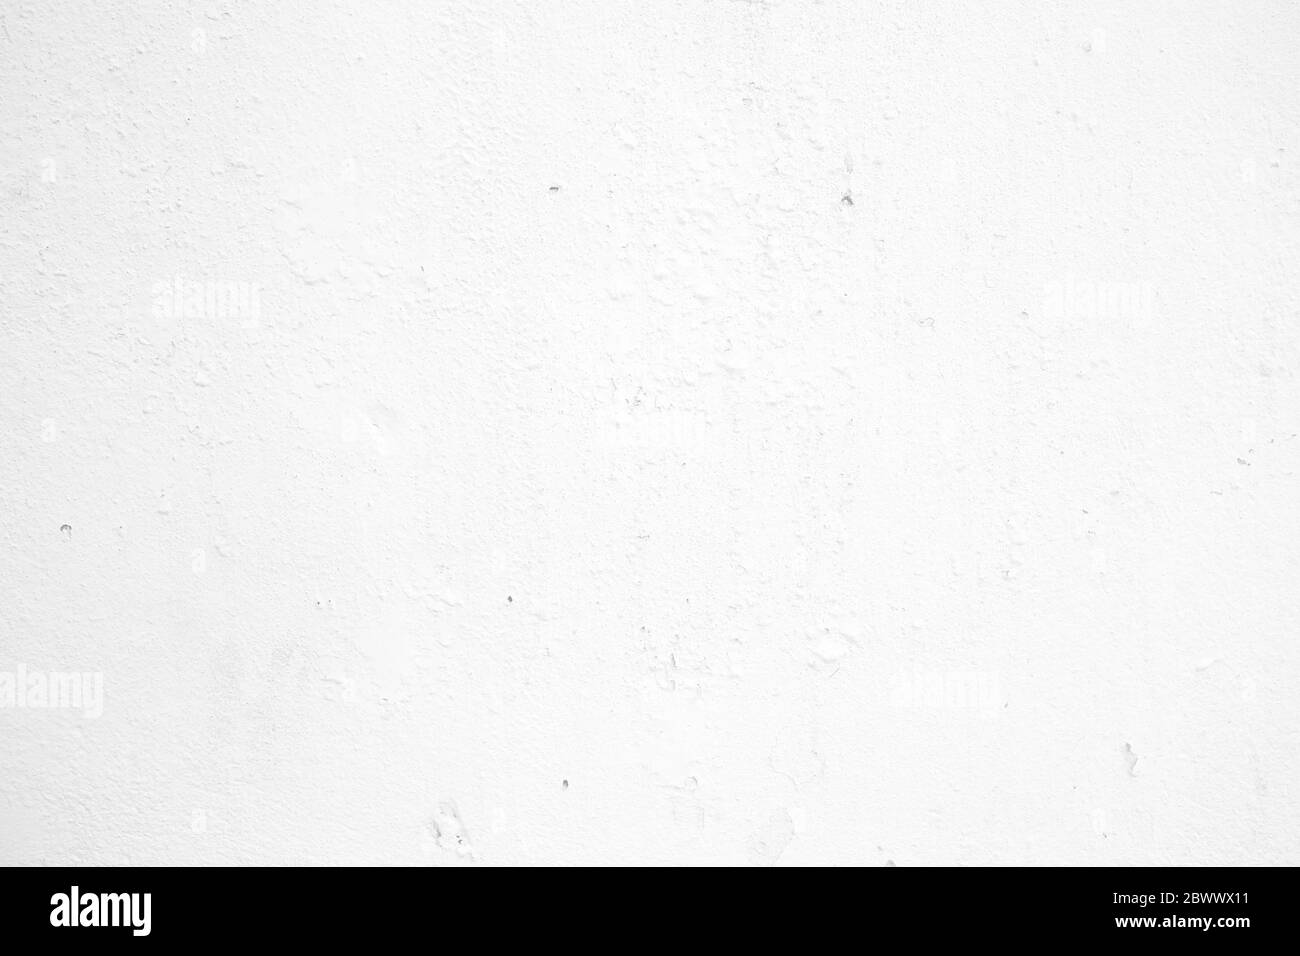 White Grunge Peeling Painted Concrete Wall Texture Background. Stock Photo